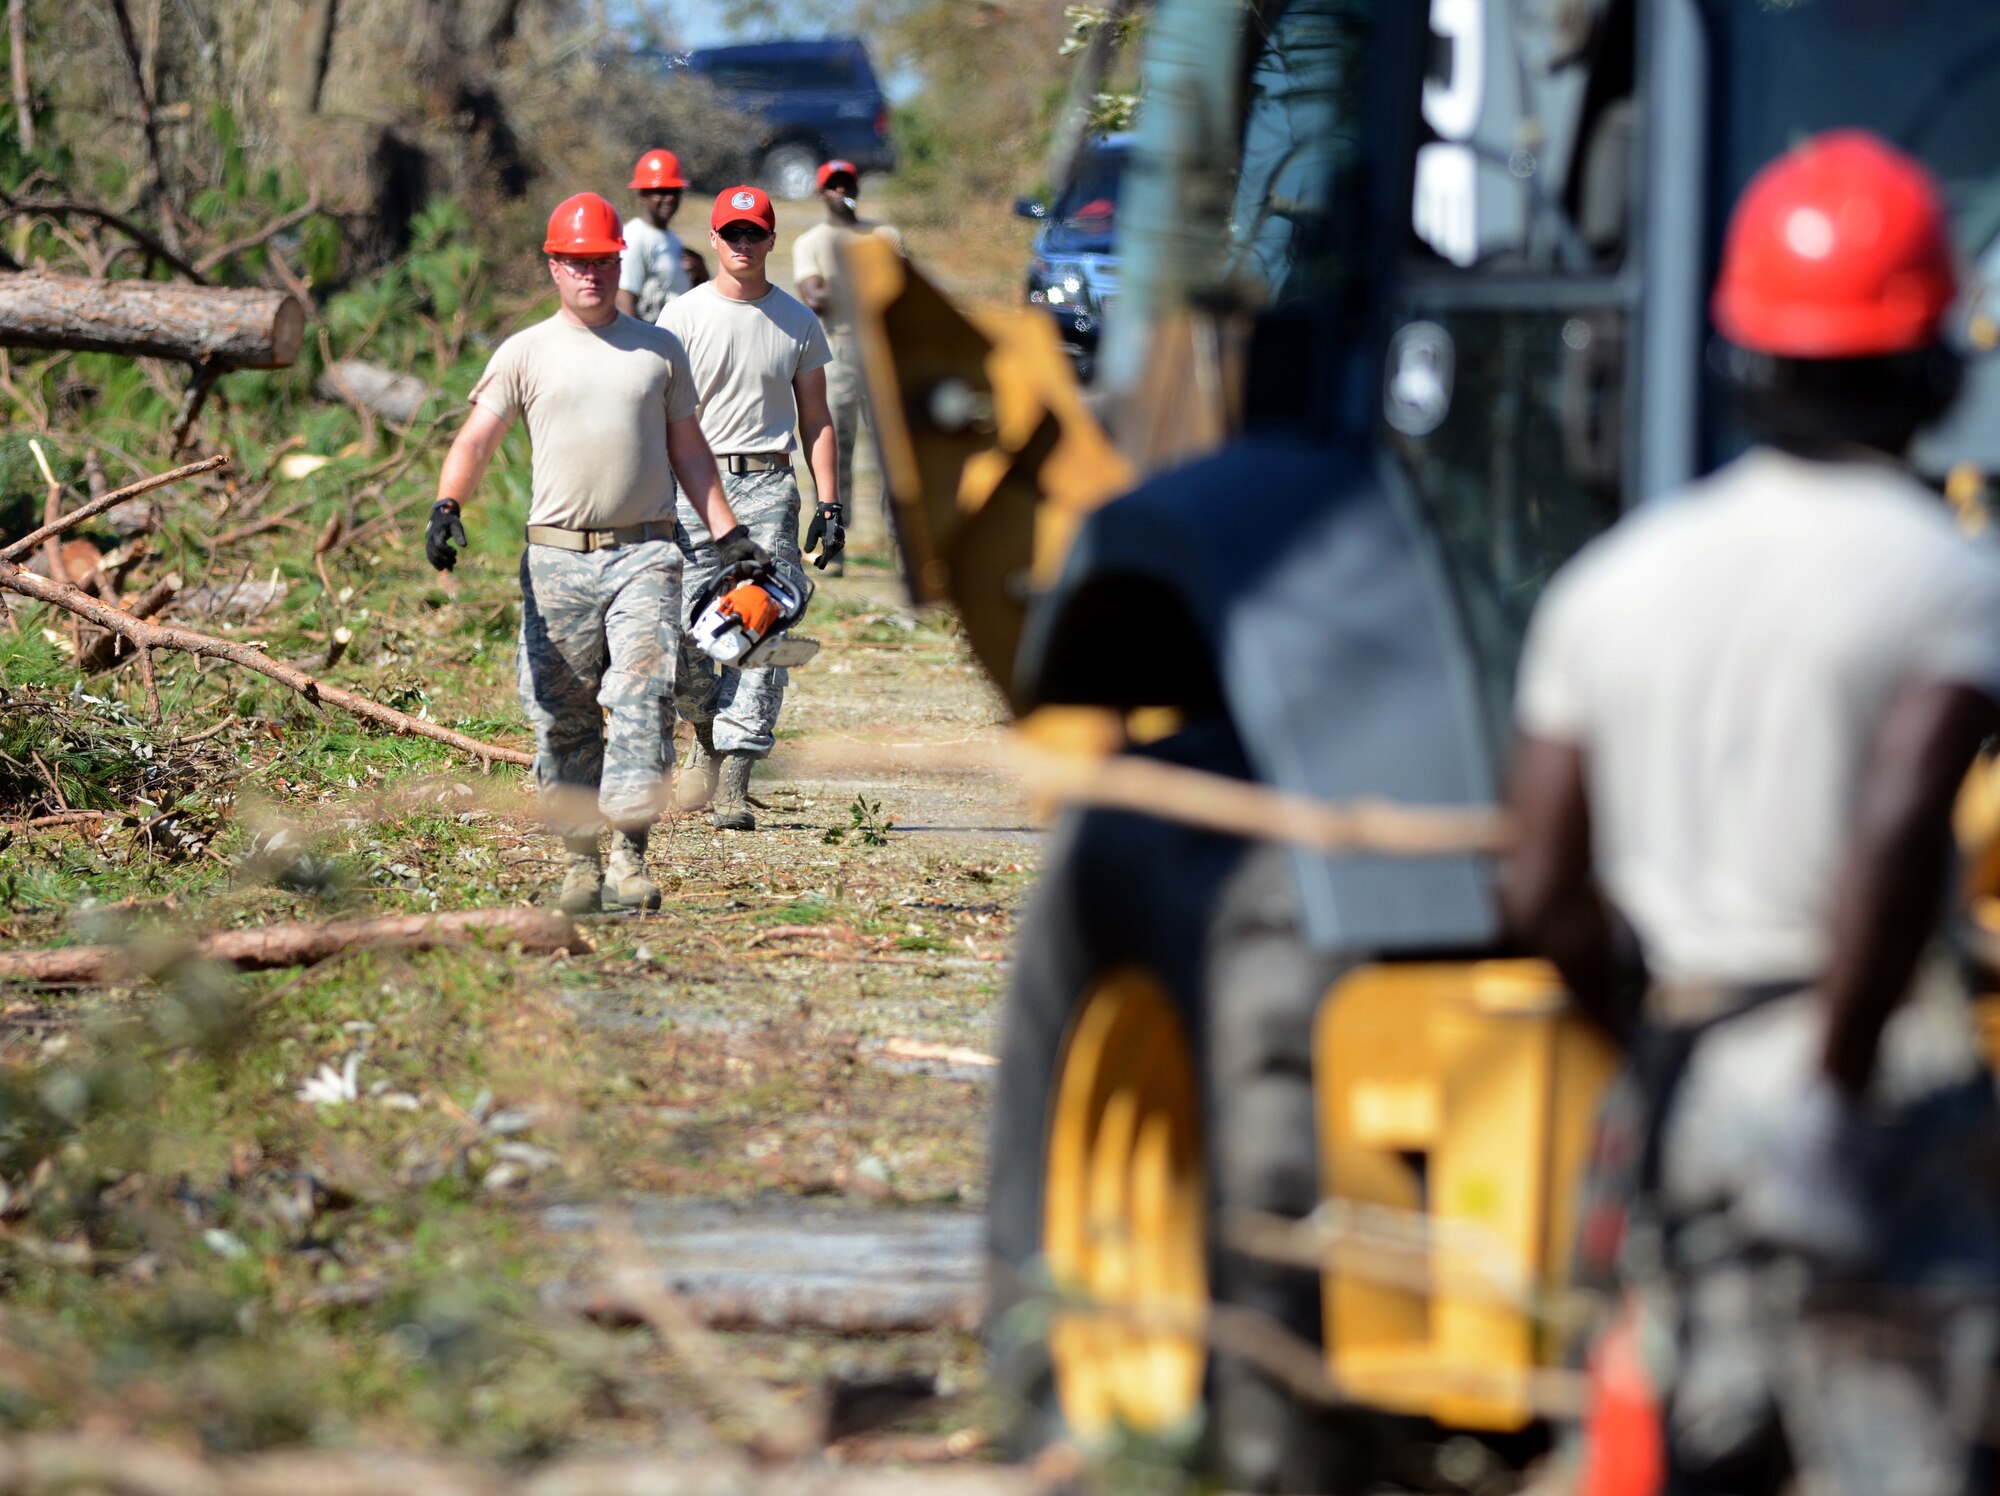 Florida Guardsmen from the 202nd REDHORSE break down fallen trees completely isolating a section of Nadine Road on Oct. 14, 2018 in Panama City, Florida. #HurricaneMichael brought 130 knot winds that uprooted and upended fully grown trees onto roadways all over the area. (U.S. Air National Guard photo by Master Sgt. William Buchanan)